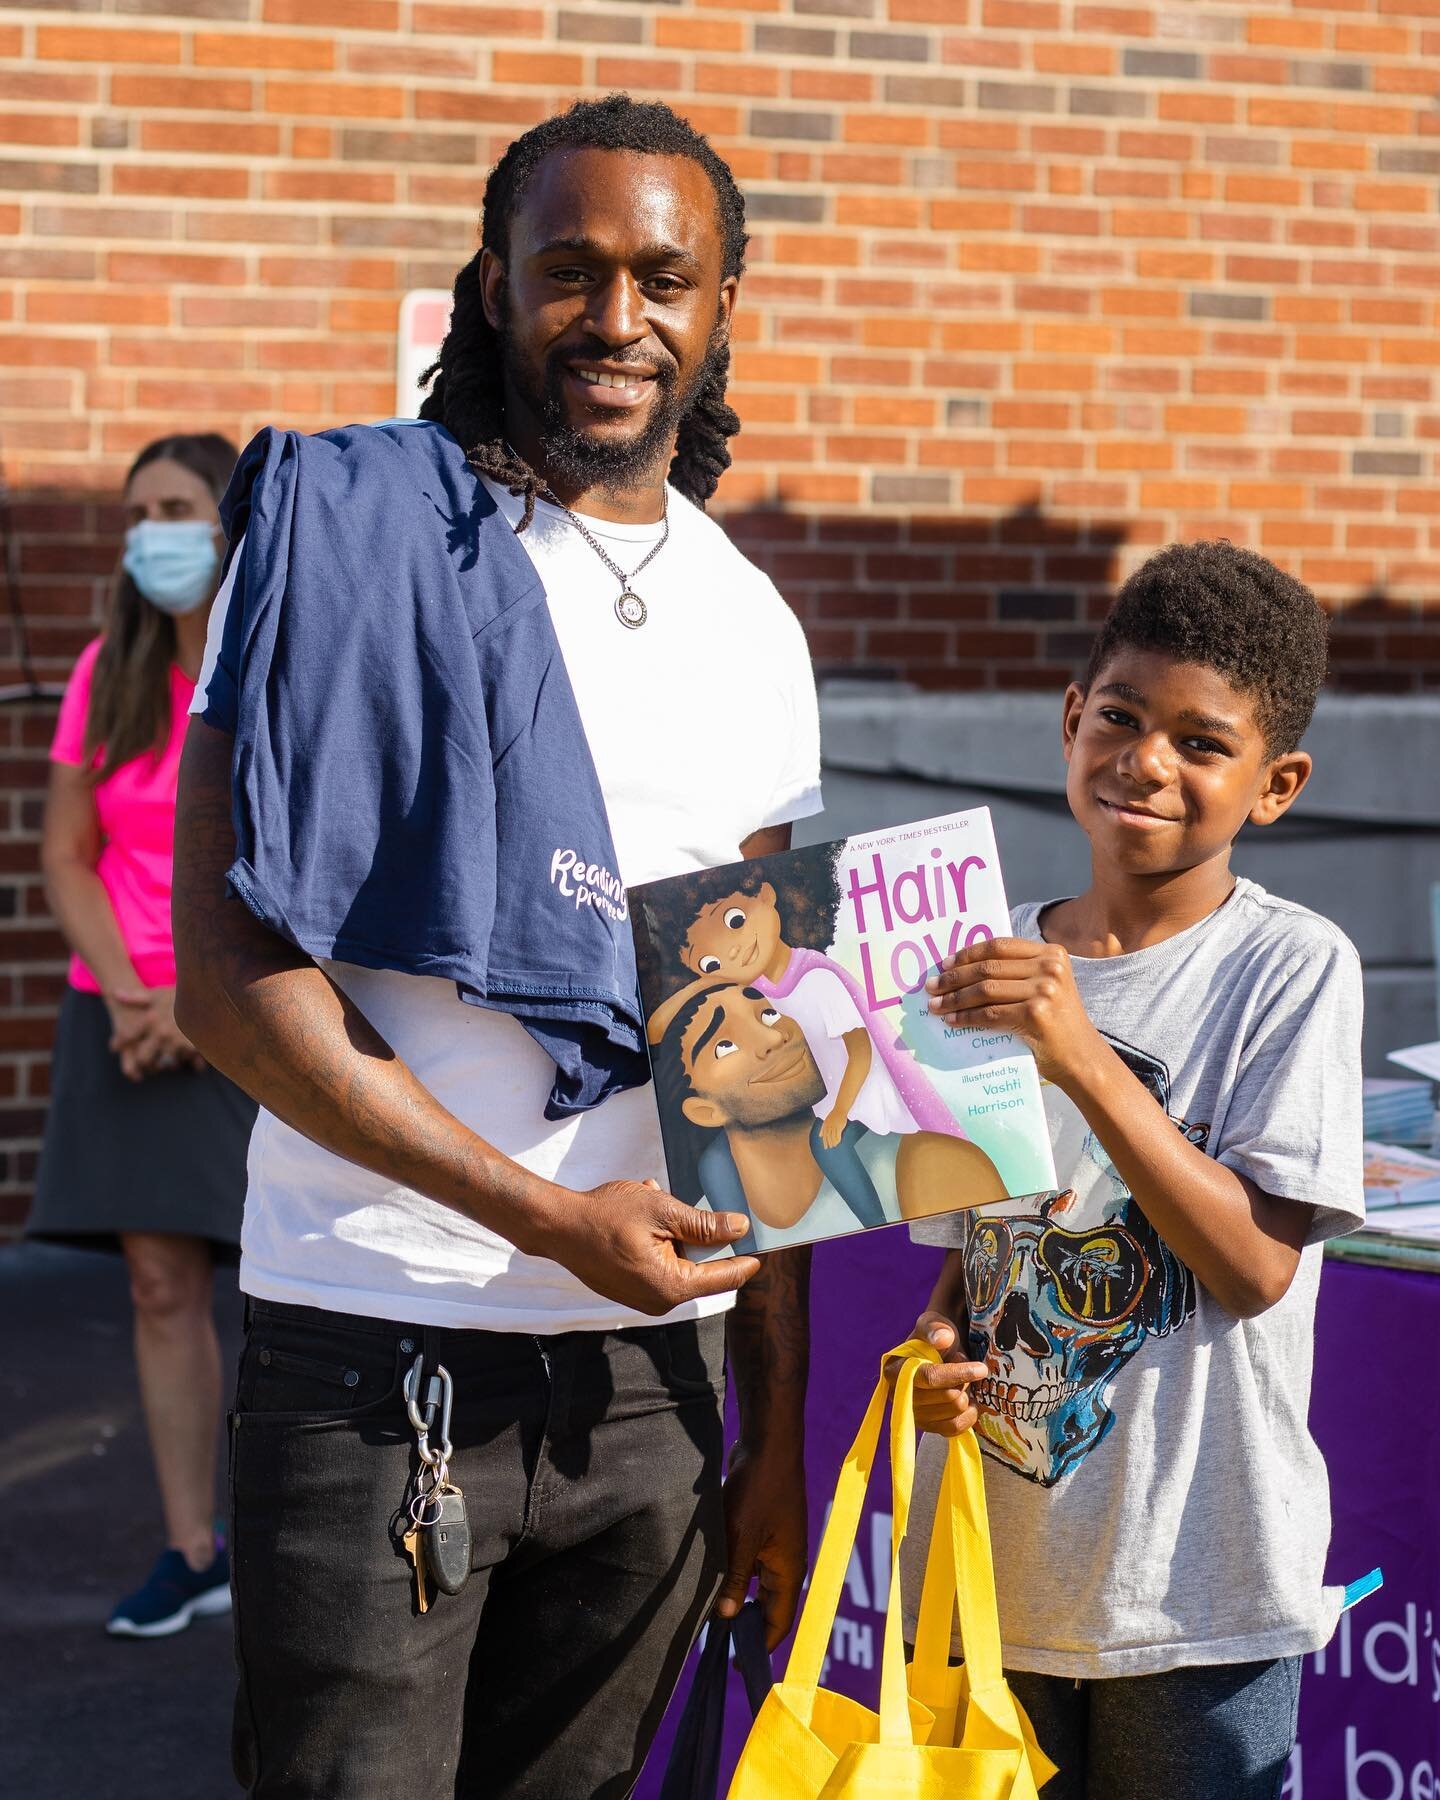 We celebrated Father's Day with West Philly Reading Captains who gave out books and prizes to some amazing, dope, fantastic dads and father figures at Sharp Skills Barbershop. We see you, dads!👏🏾👏🏿👏🏻
.
.
.
.
.
.
#dad  #fathersday #earlyliteracy